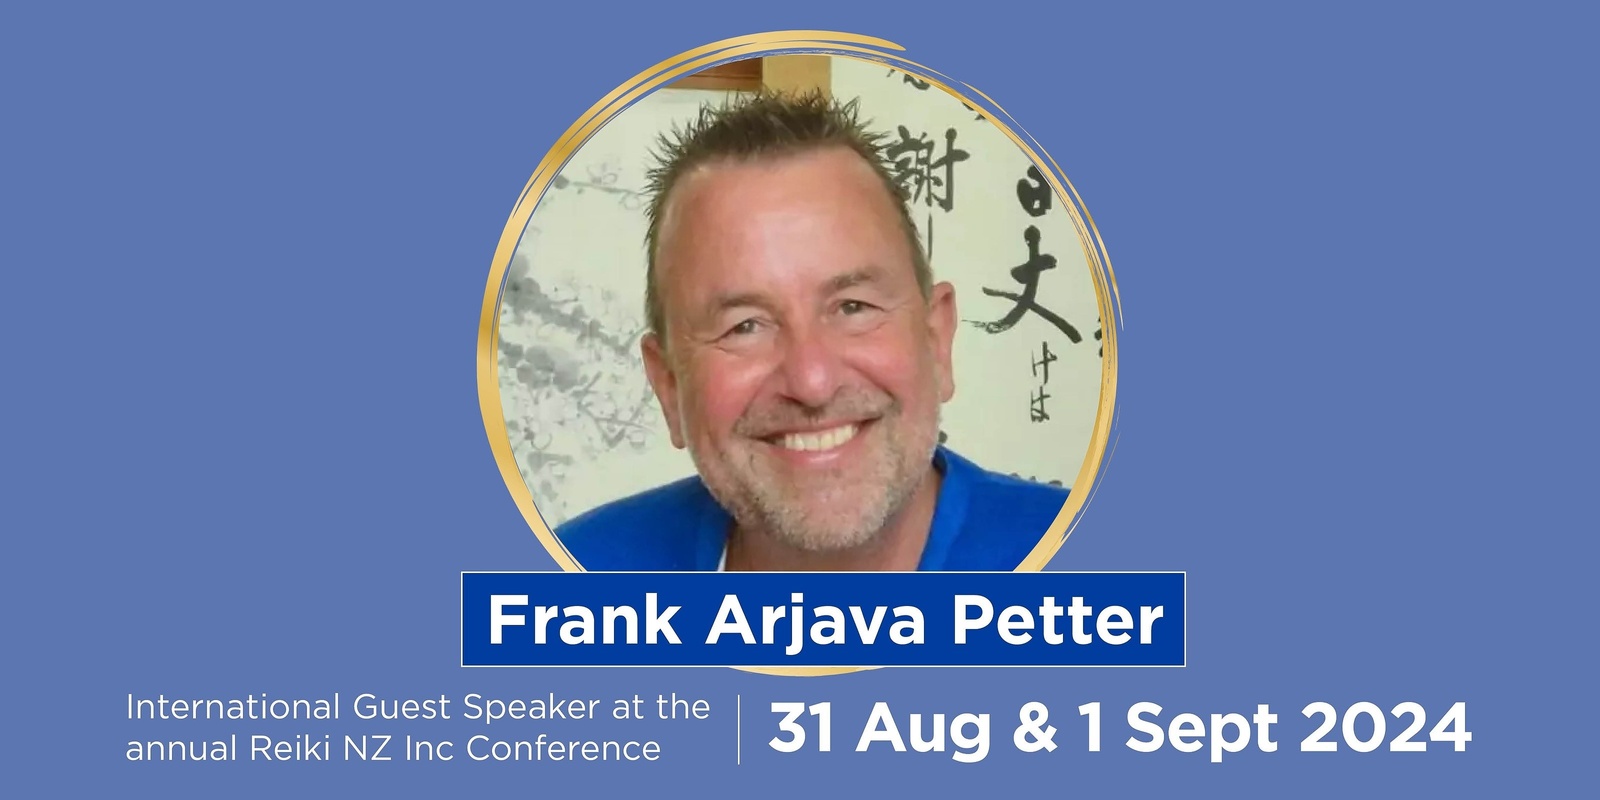 Banner image for Jikiden Reiki Class, Levels 1 & 2 , Auckland NZ, 2-6 Sept 2024 with Frank Arjava Petter